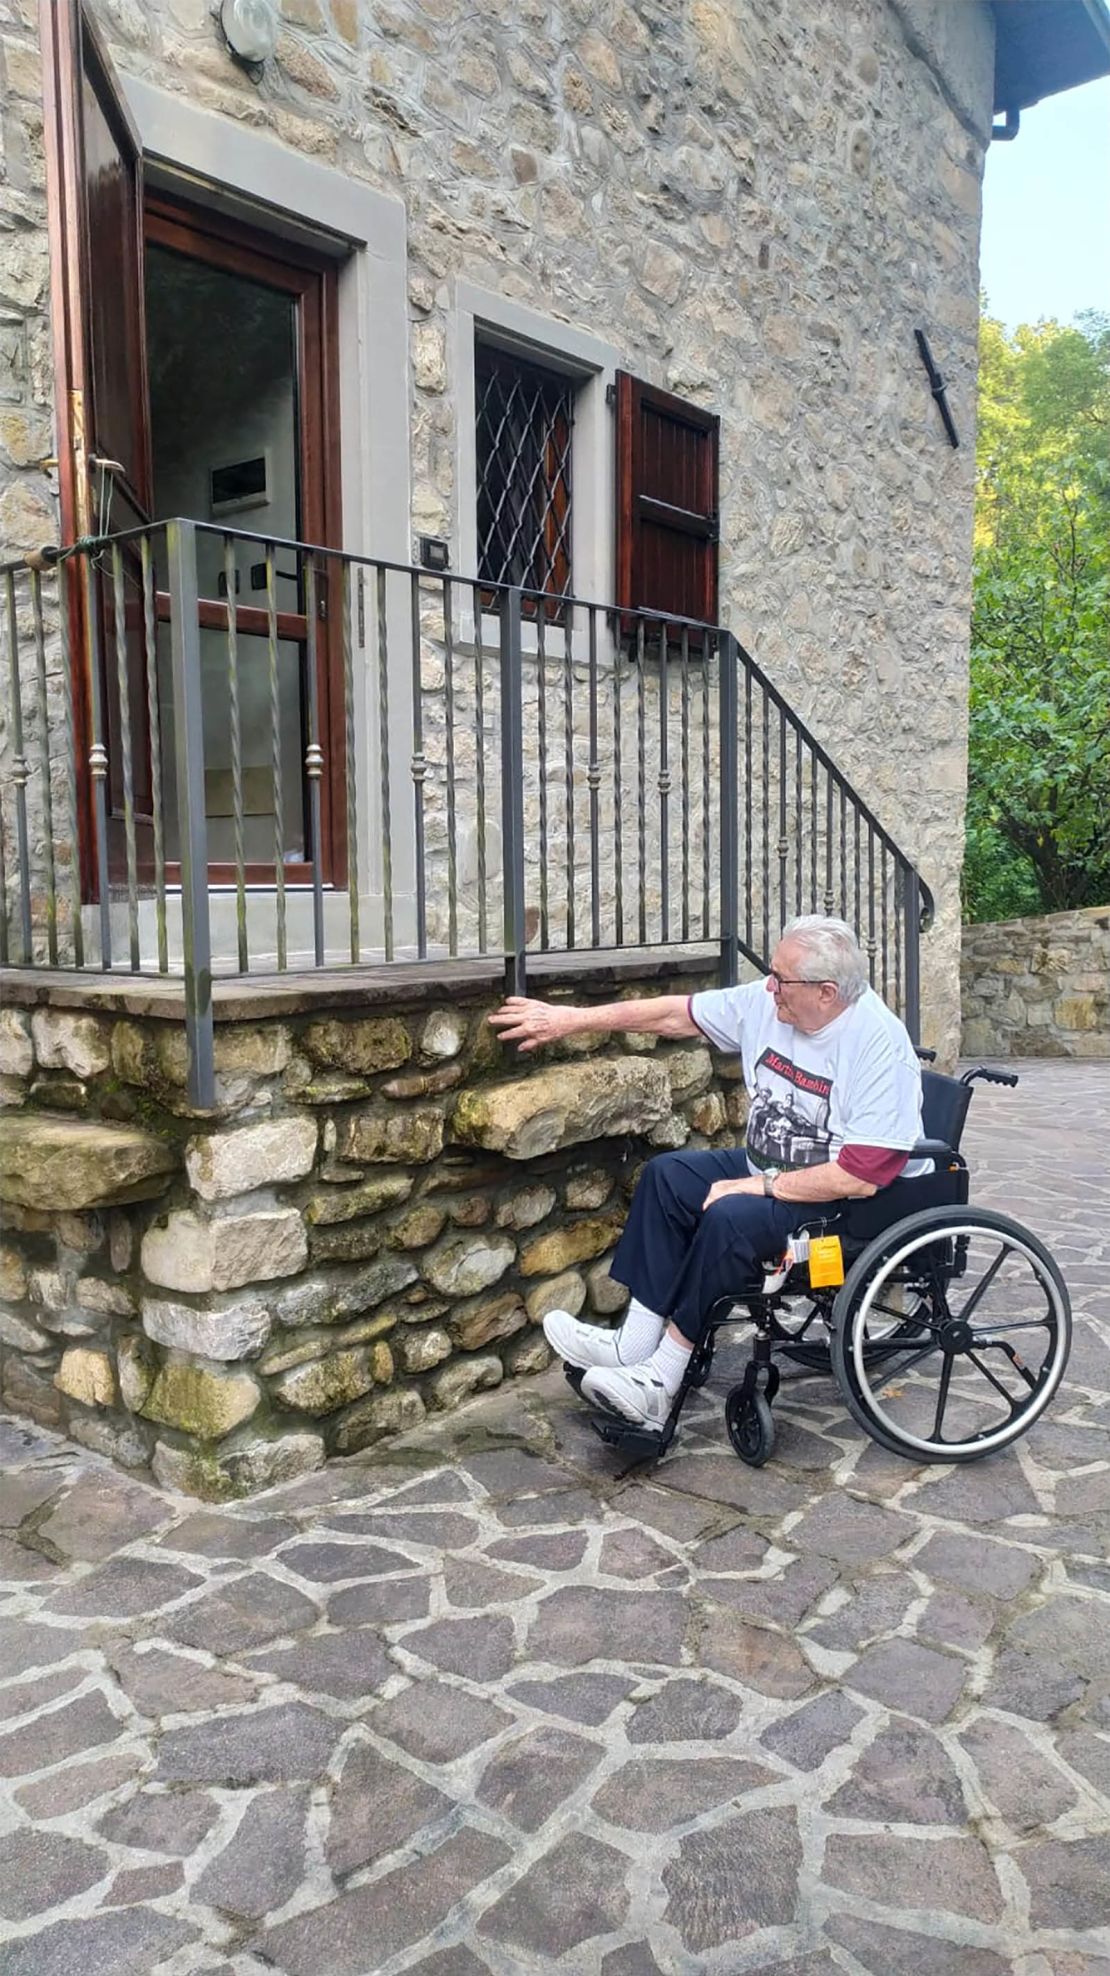  Adler pictured outside the house in the village of Monterenzio where he found the siblings.